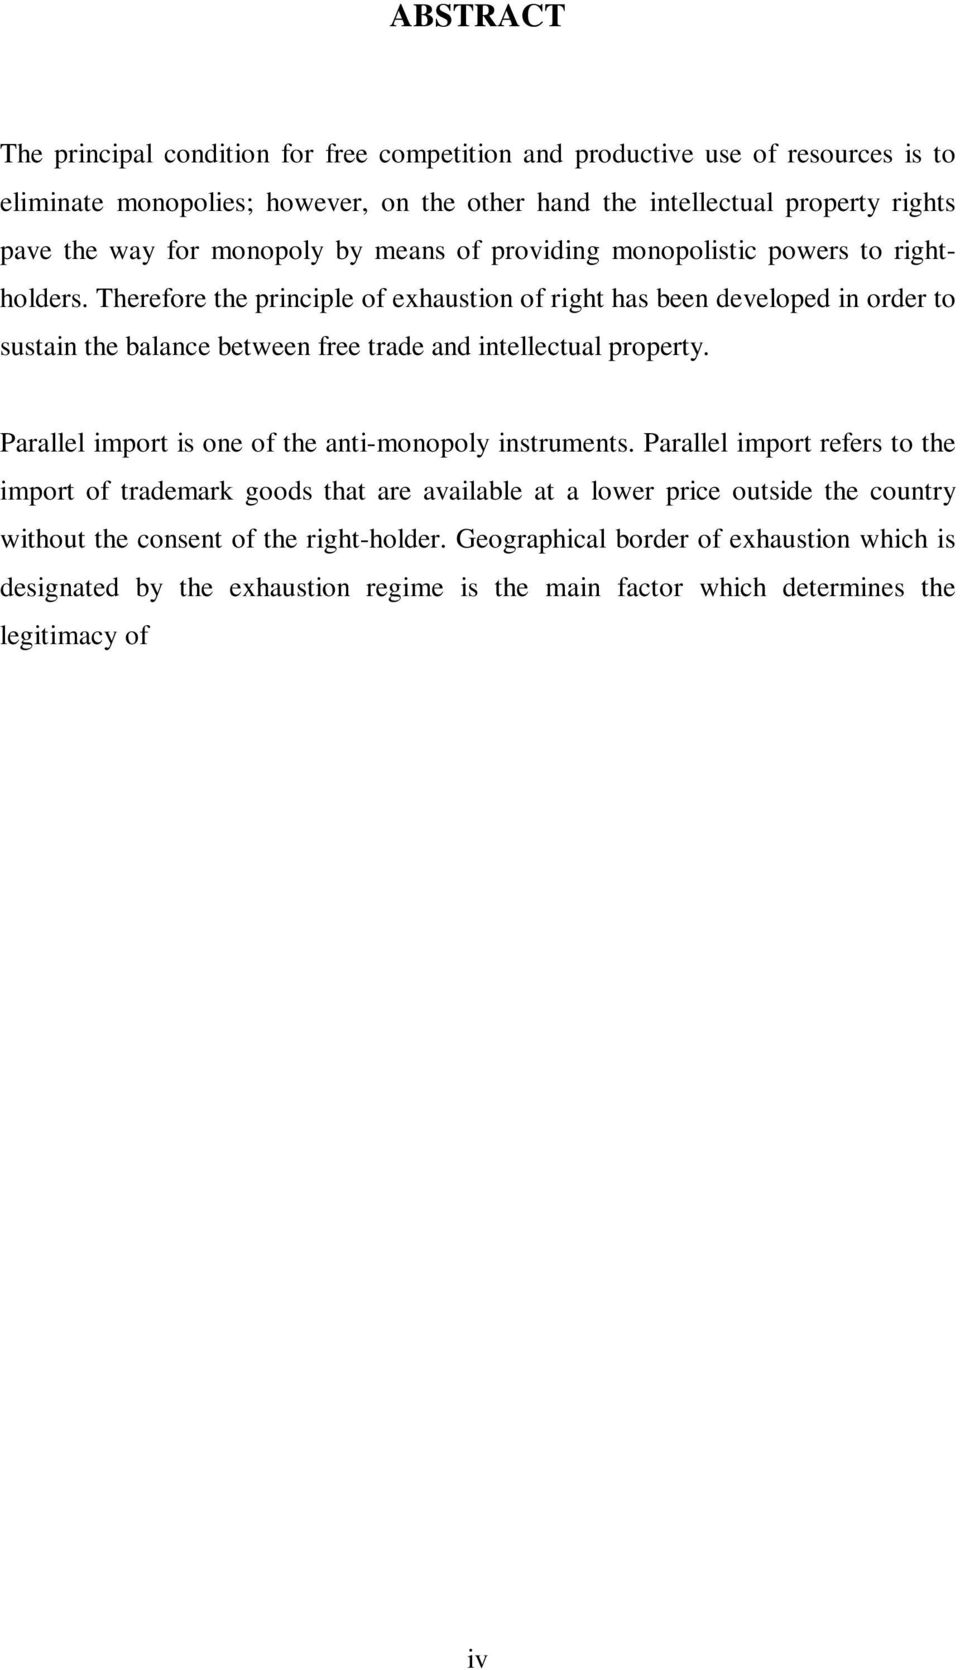 Therefore the principle of exhaustion of right has been developed in order to sustain the balance between free trade and intellectual property. Parallel import is one of the anti-monopoly instruments.